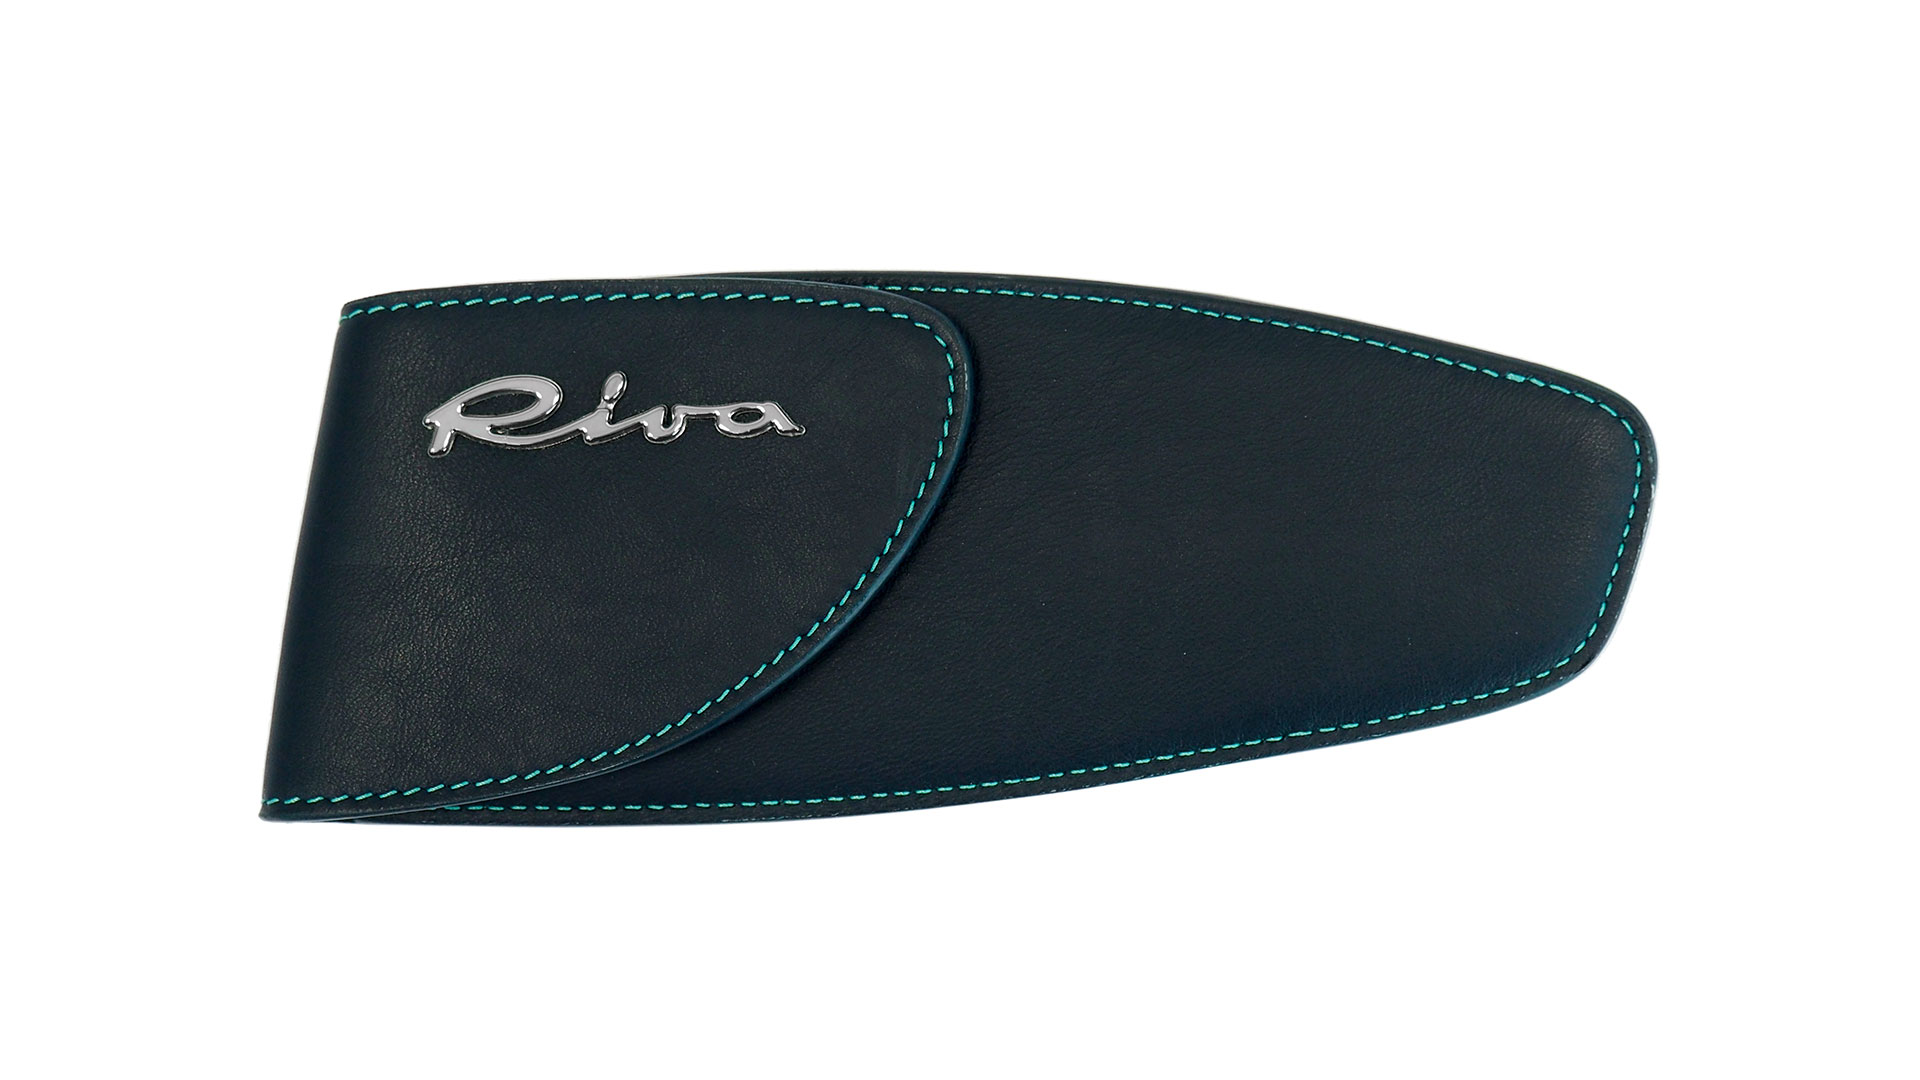 riva-yacht-idee-regalo-gifts